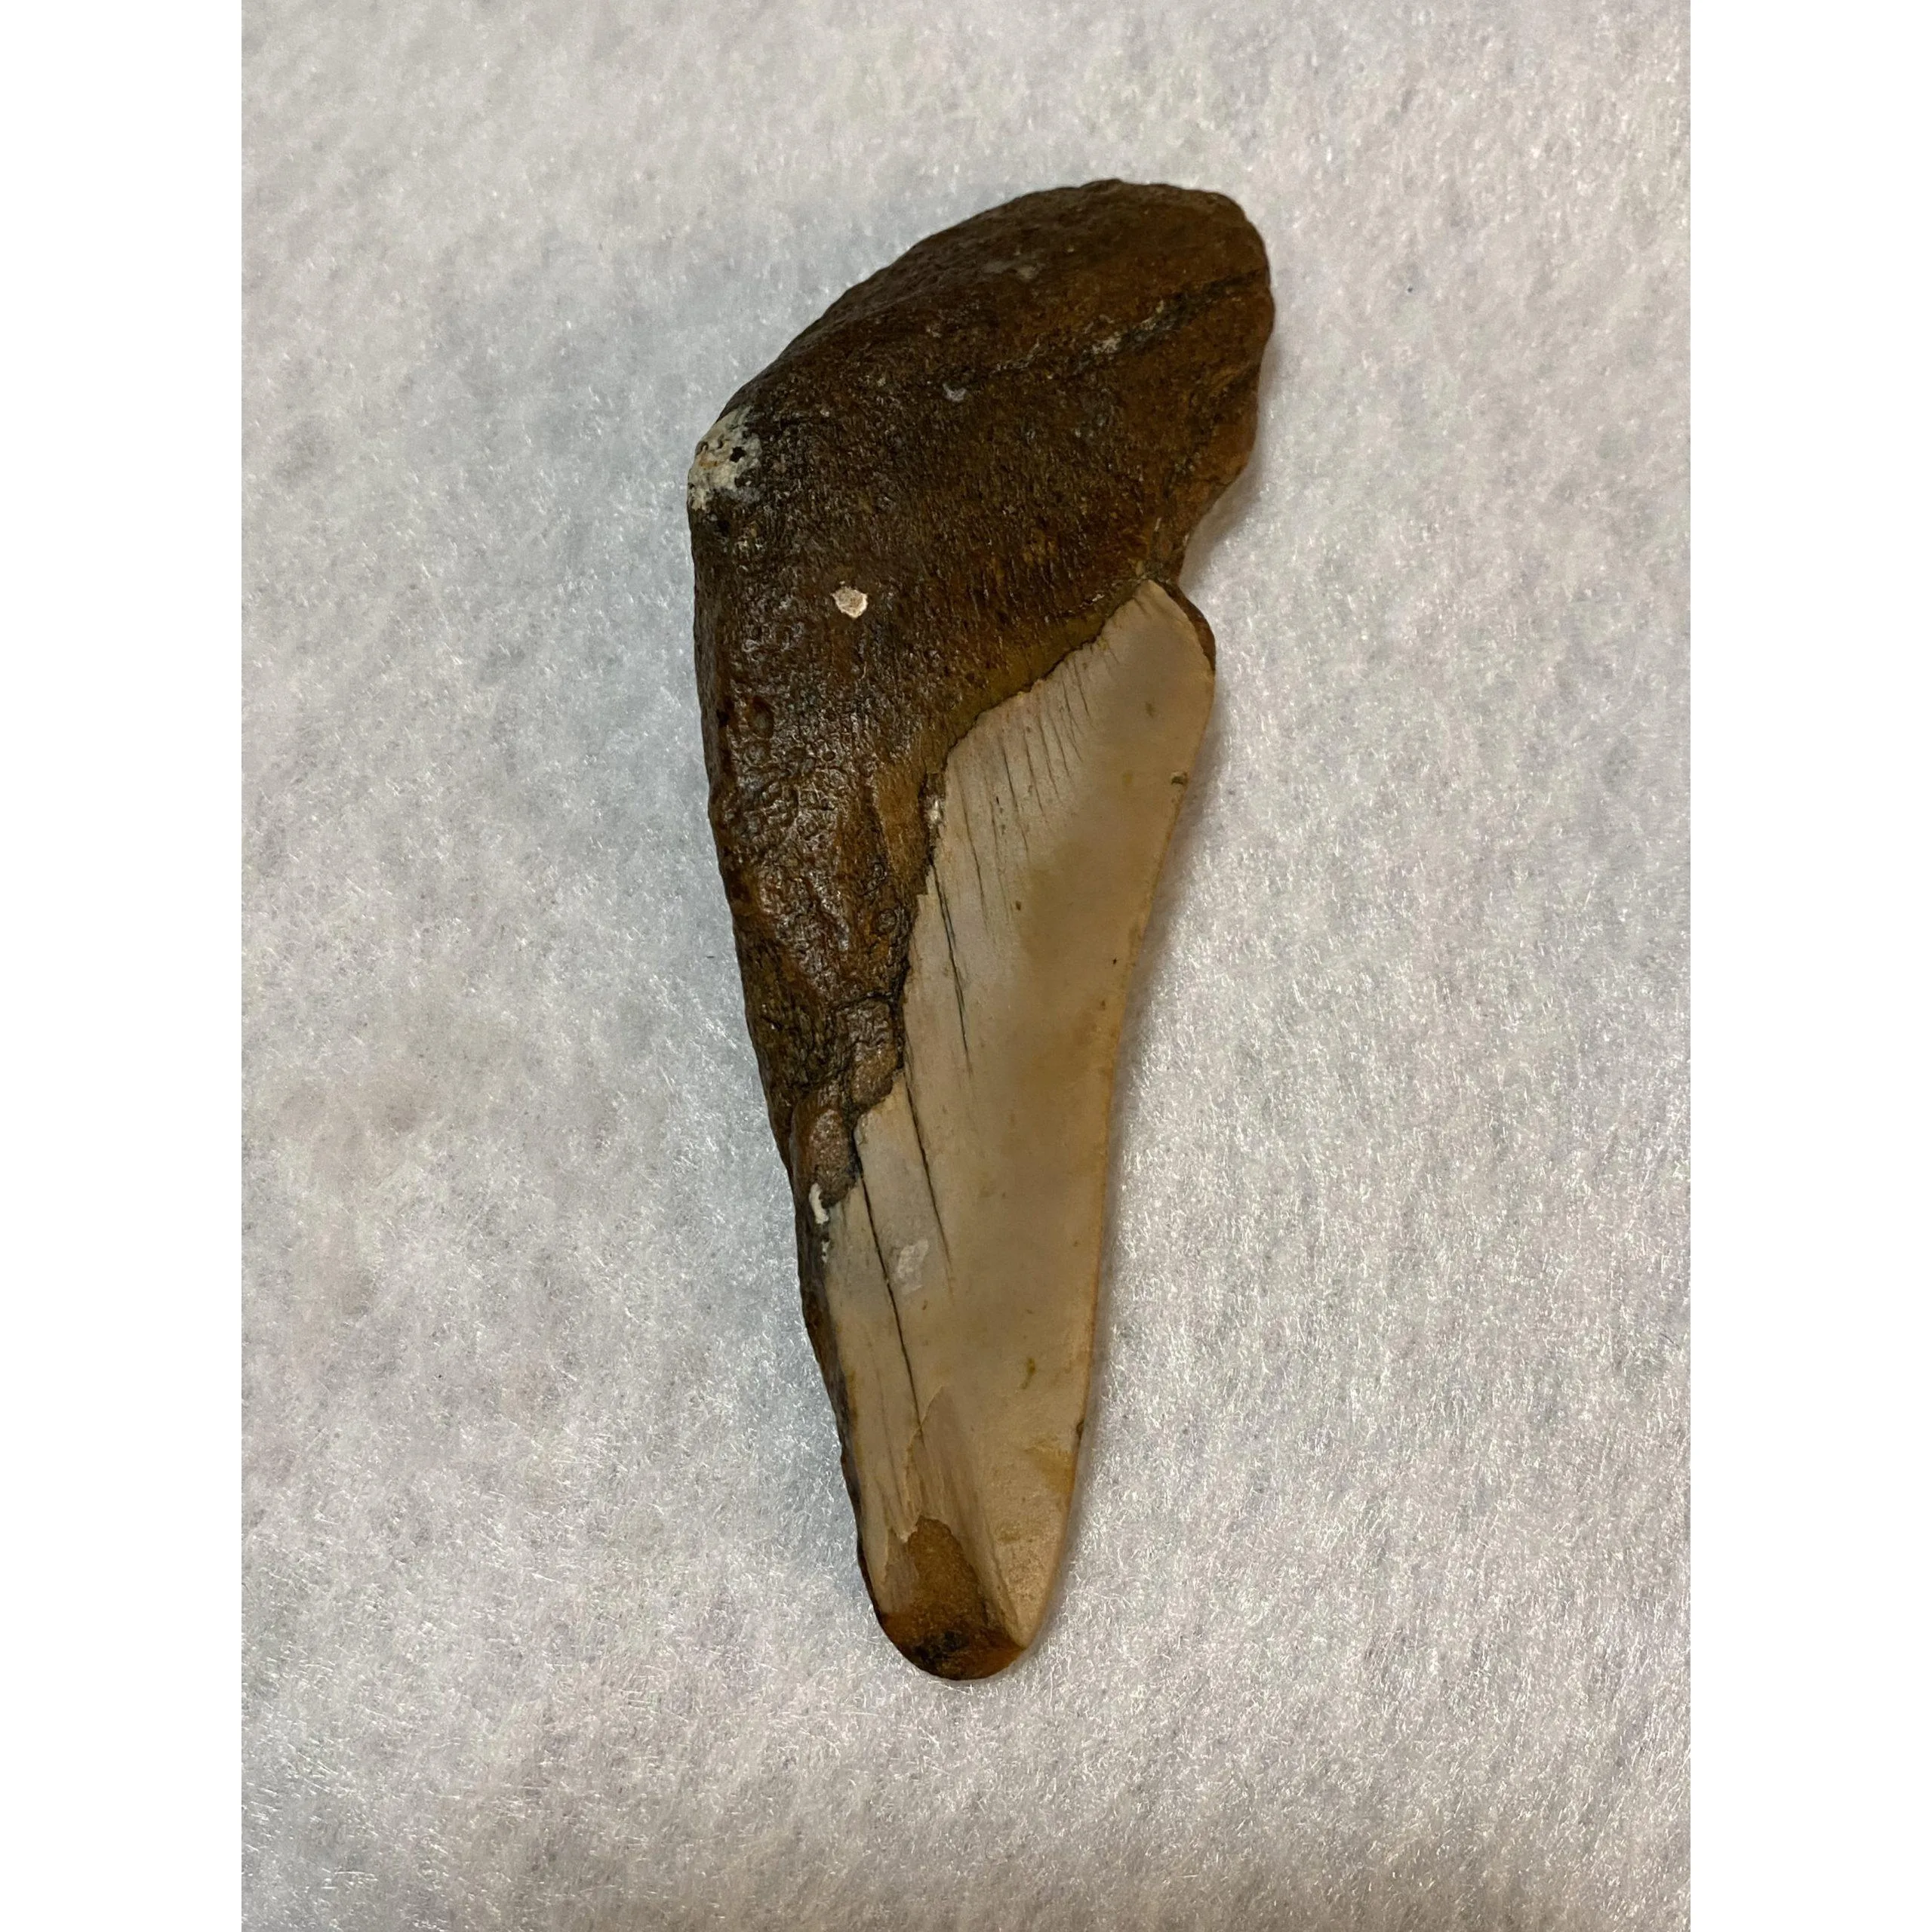 Megalodon Partial Tooth, South Carolina, 4.92 inch Prehistoric Online